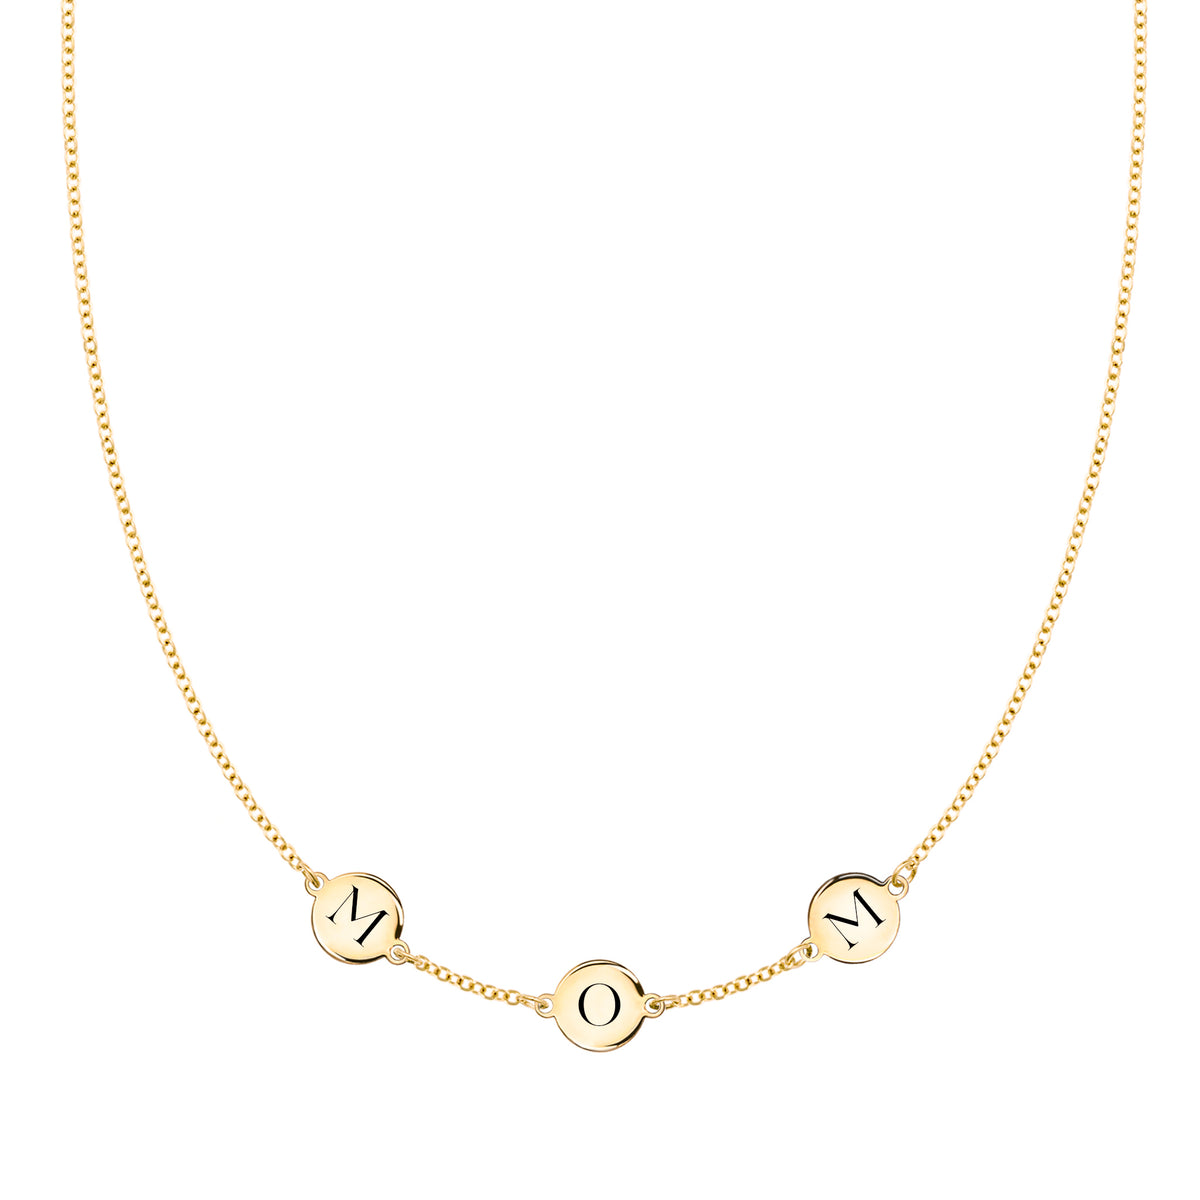 14K Yellow Gold Drawn Cable Link Chain Necklace